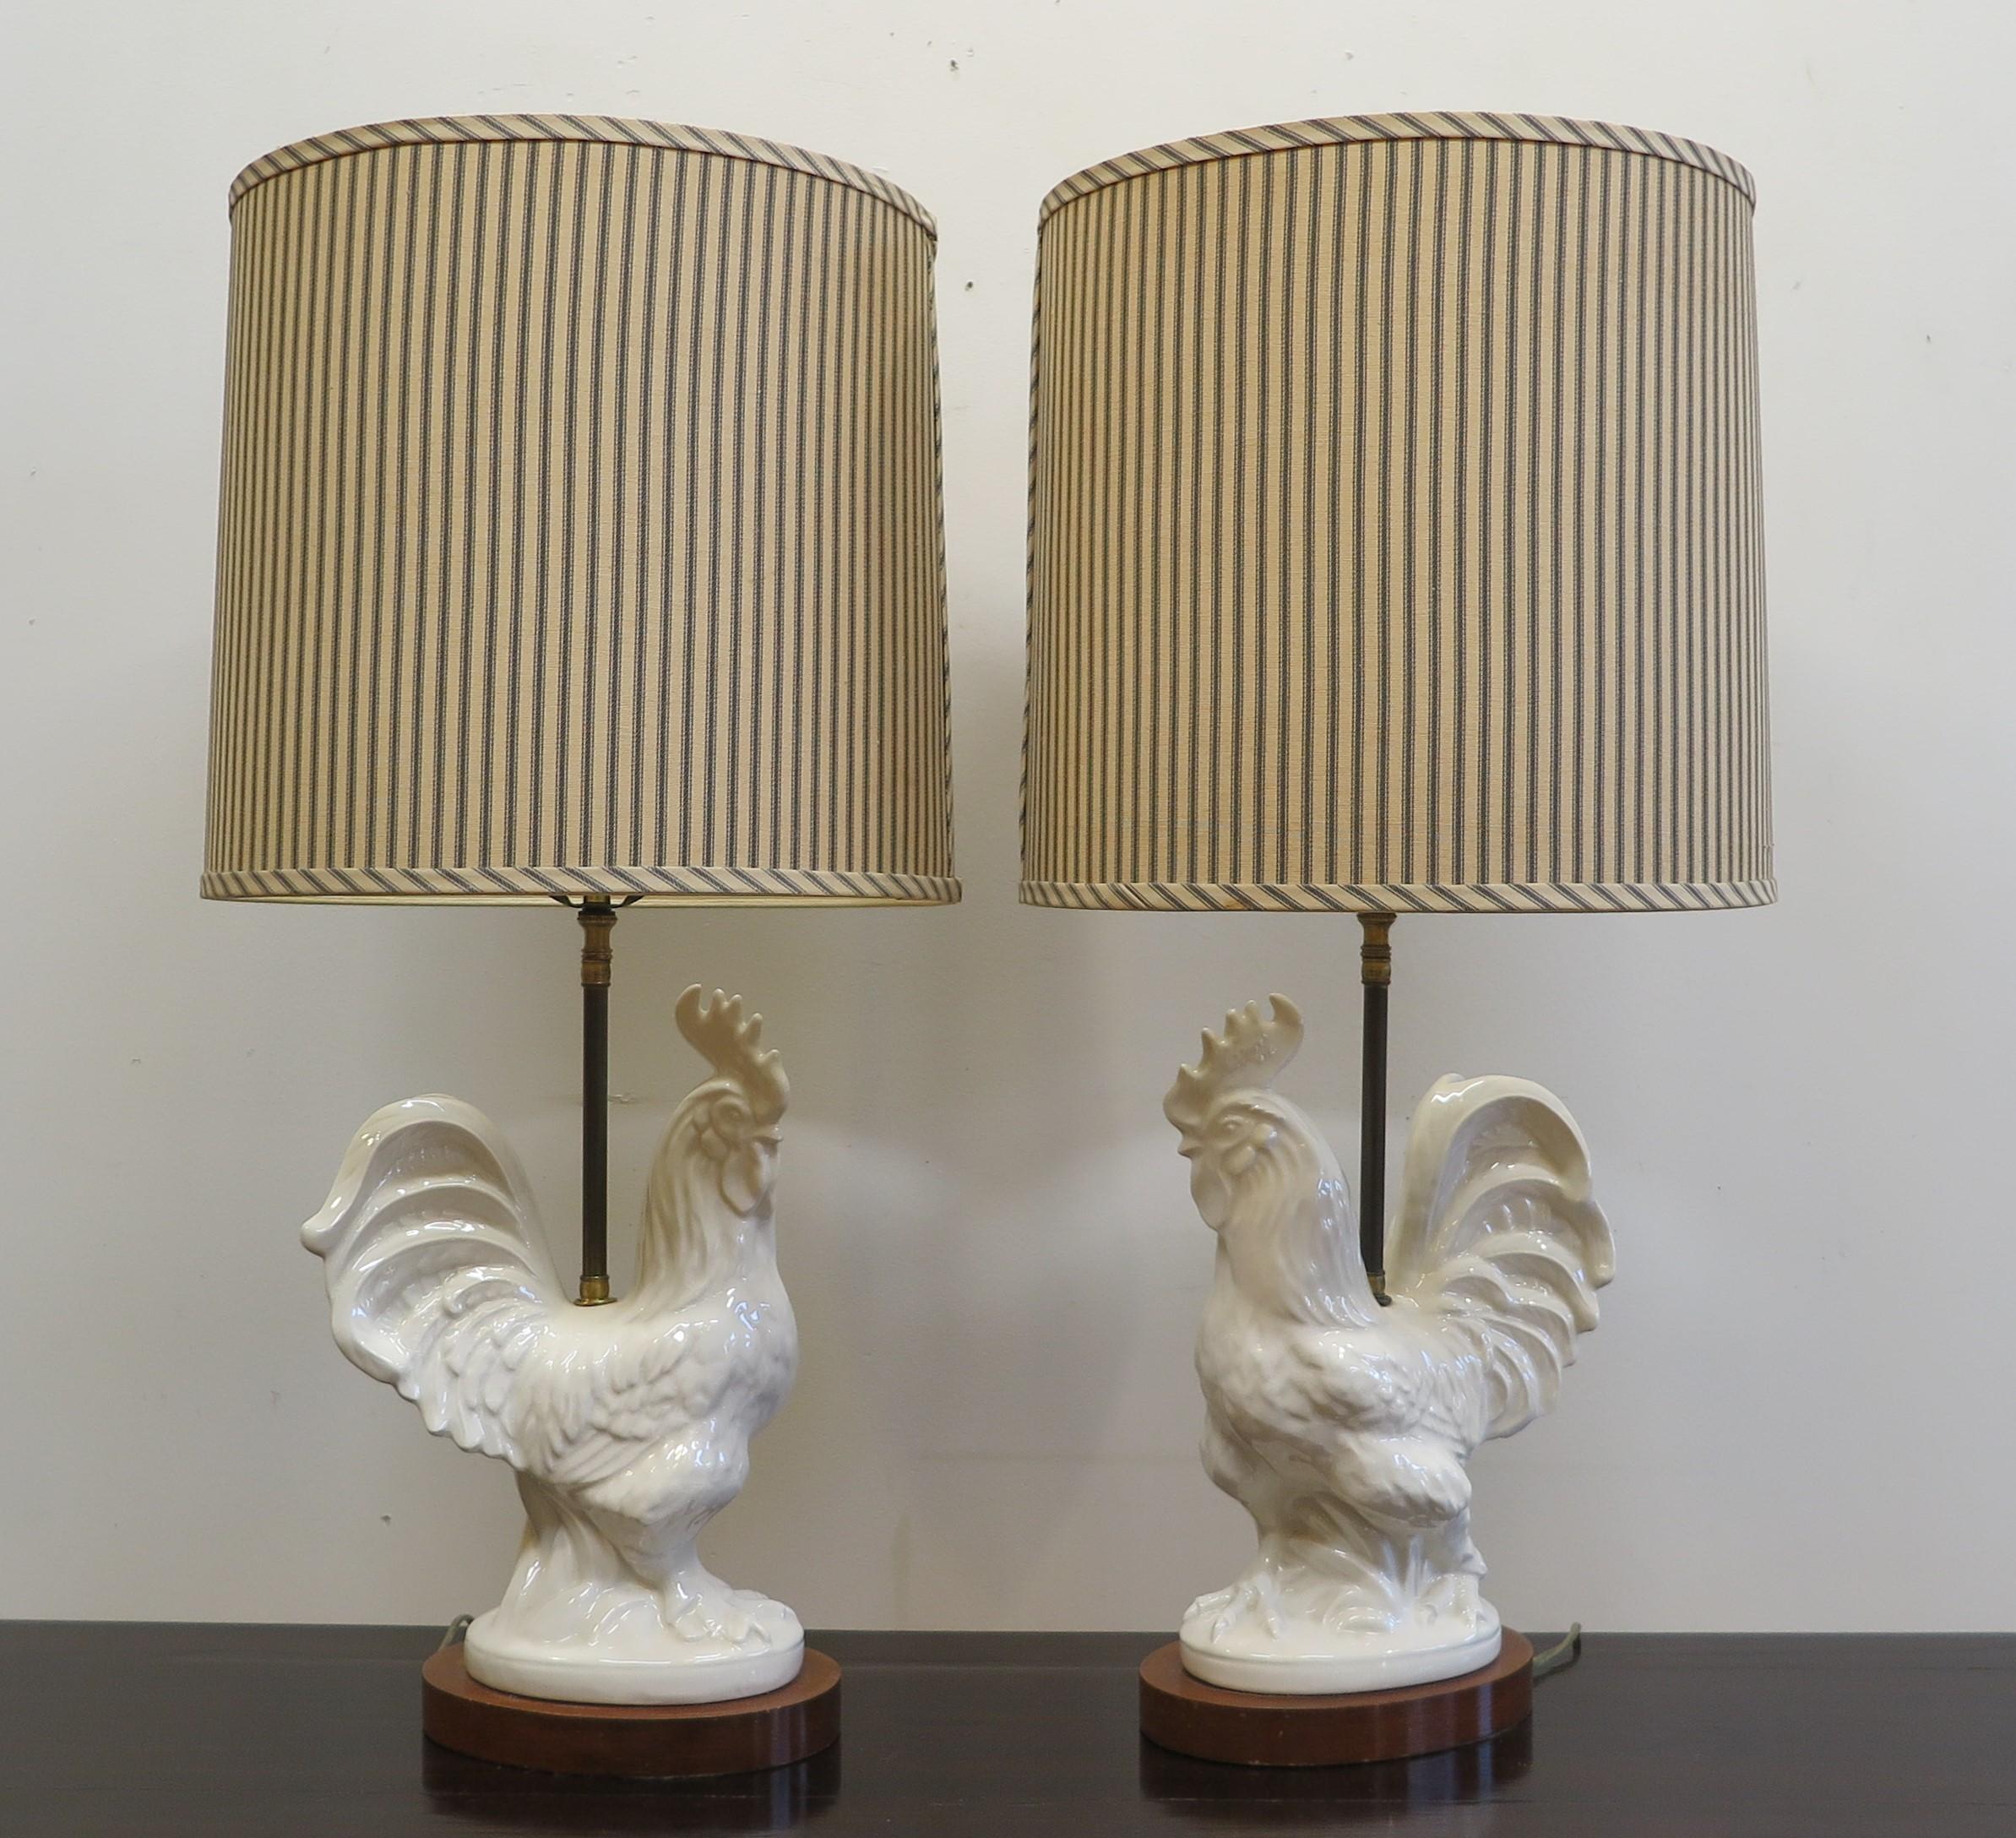 French Mid Century rooster table lamps. White ceramic rooster statues on solid wood stands with Fabric Shades. The shades are 14 inch diameter. Very well done ceramic with true to life details made of fine quality. Having a crackle glaze that over